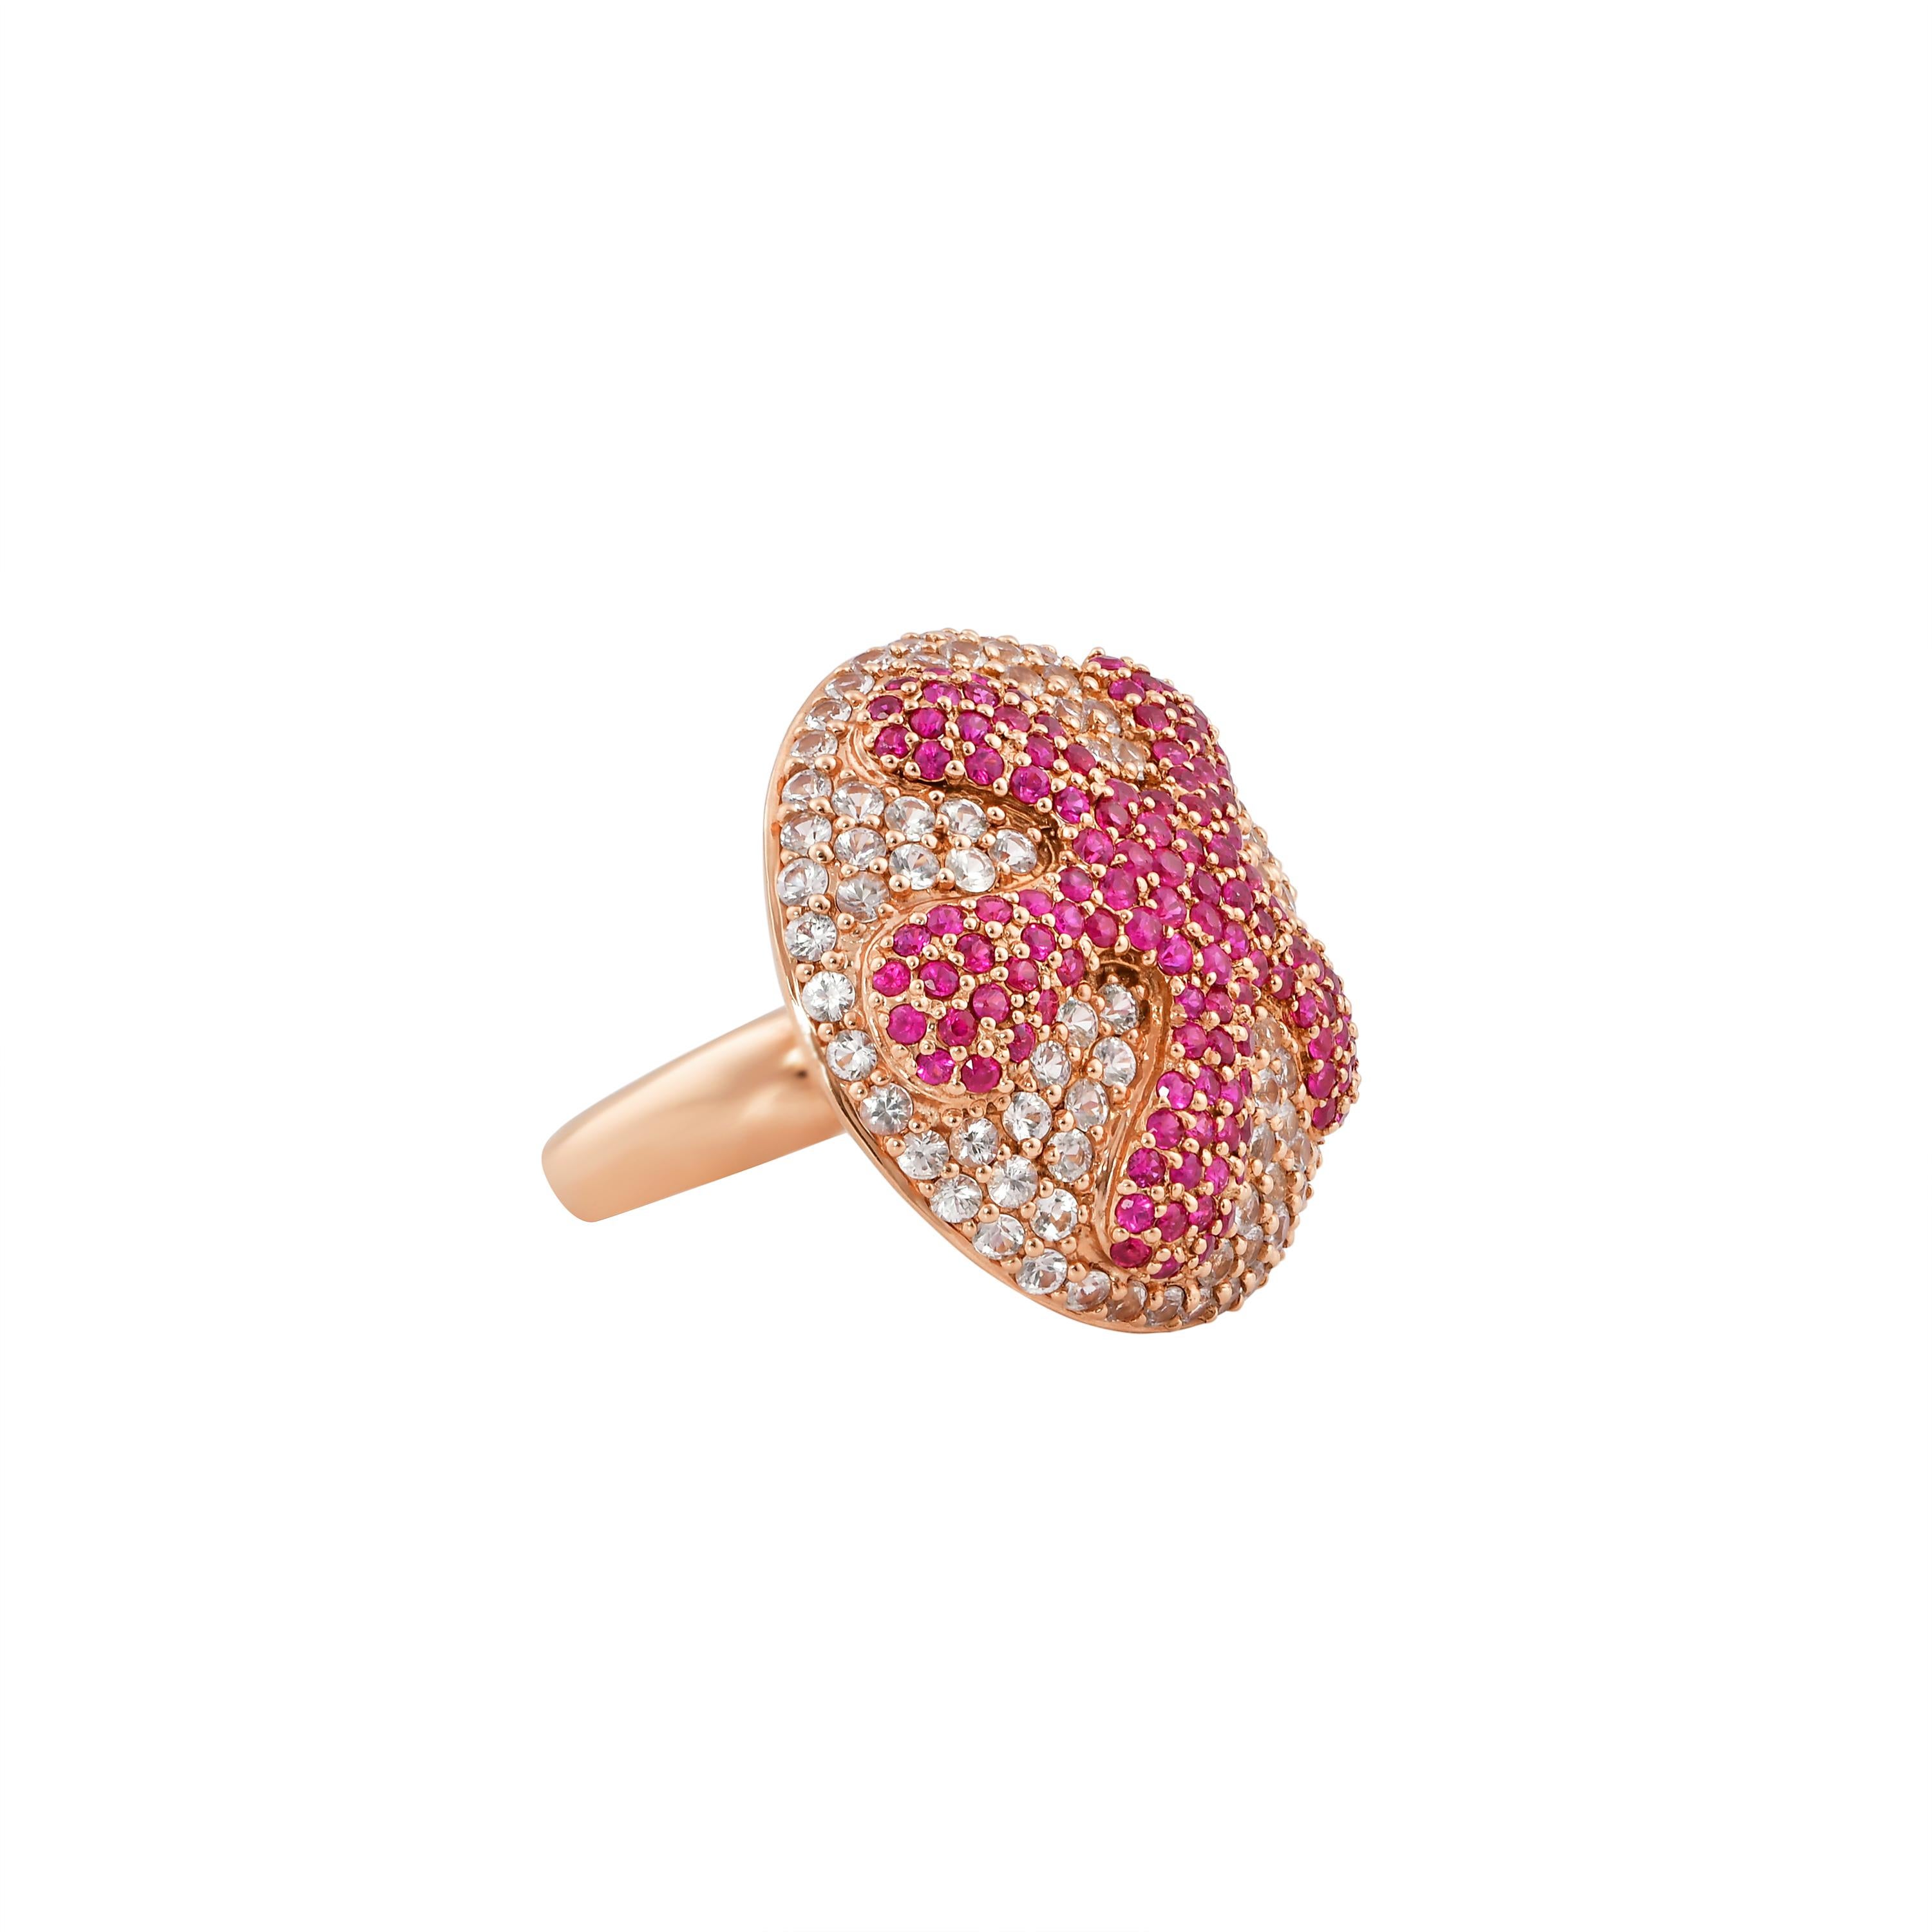 Go under the sea with this unique cocktail ring. This ring incorporates a unique pairing of color gems that are pave set to illustrate a starfish on the sea bed.  

Fancy white sapphire and ruby ring in 14K rose gold.

White Sapphire: 1.99 carat